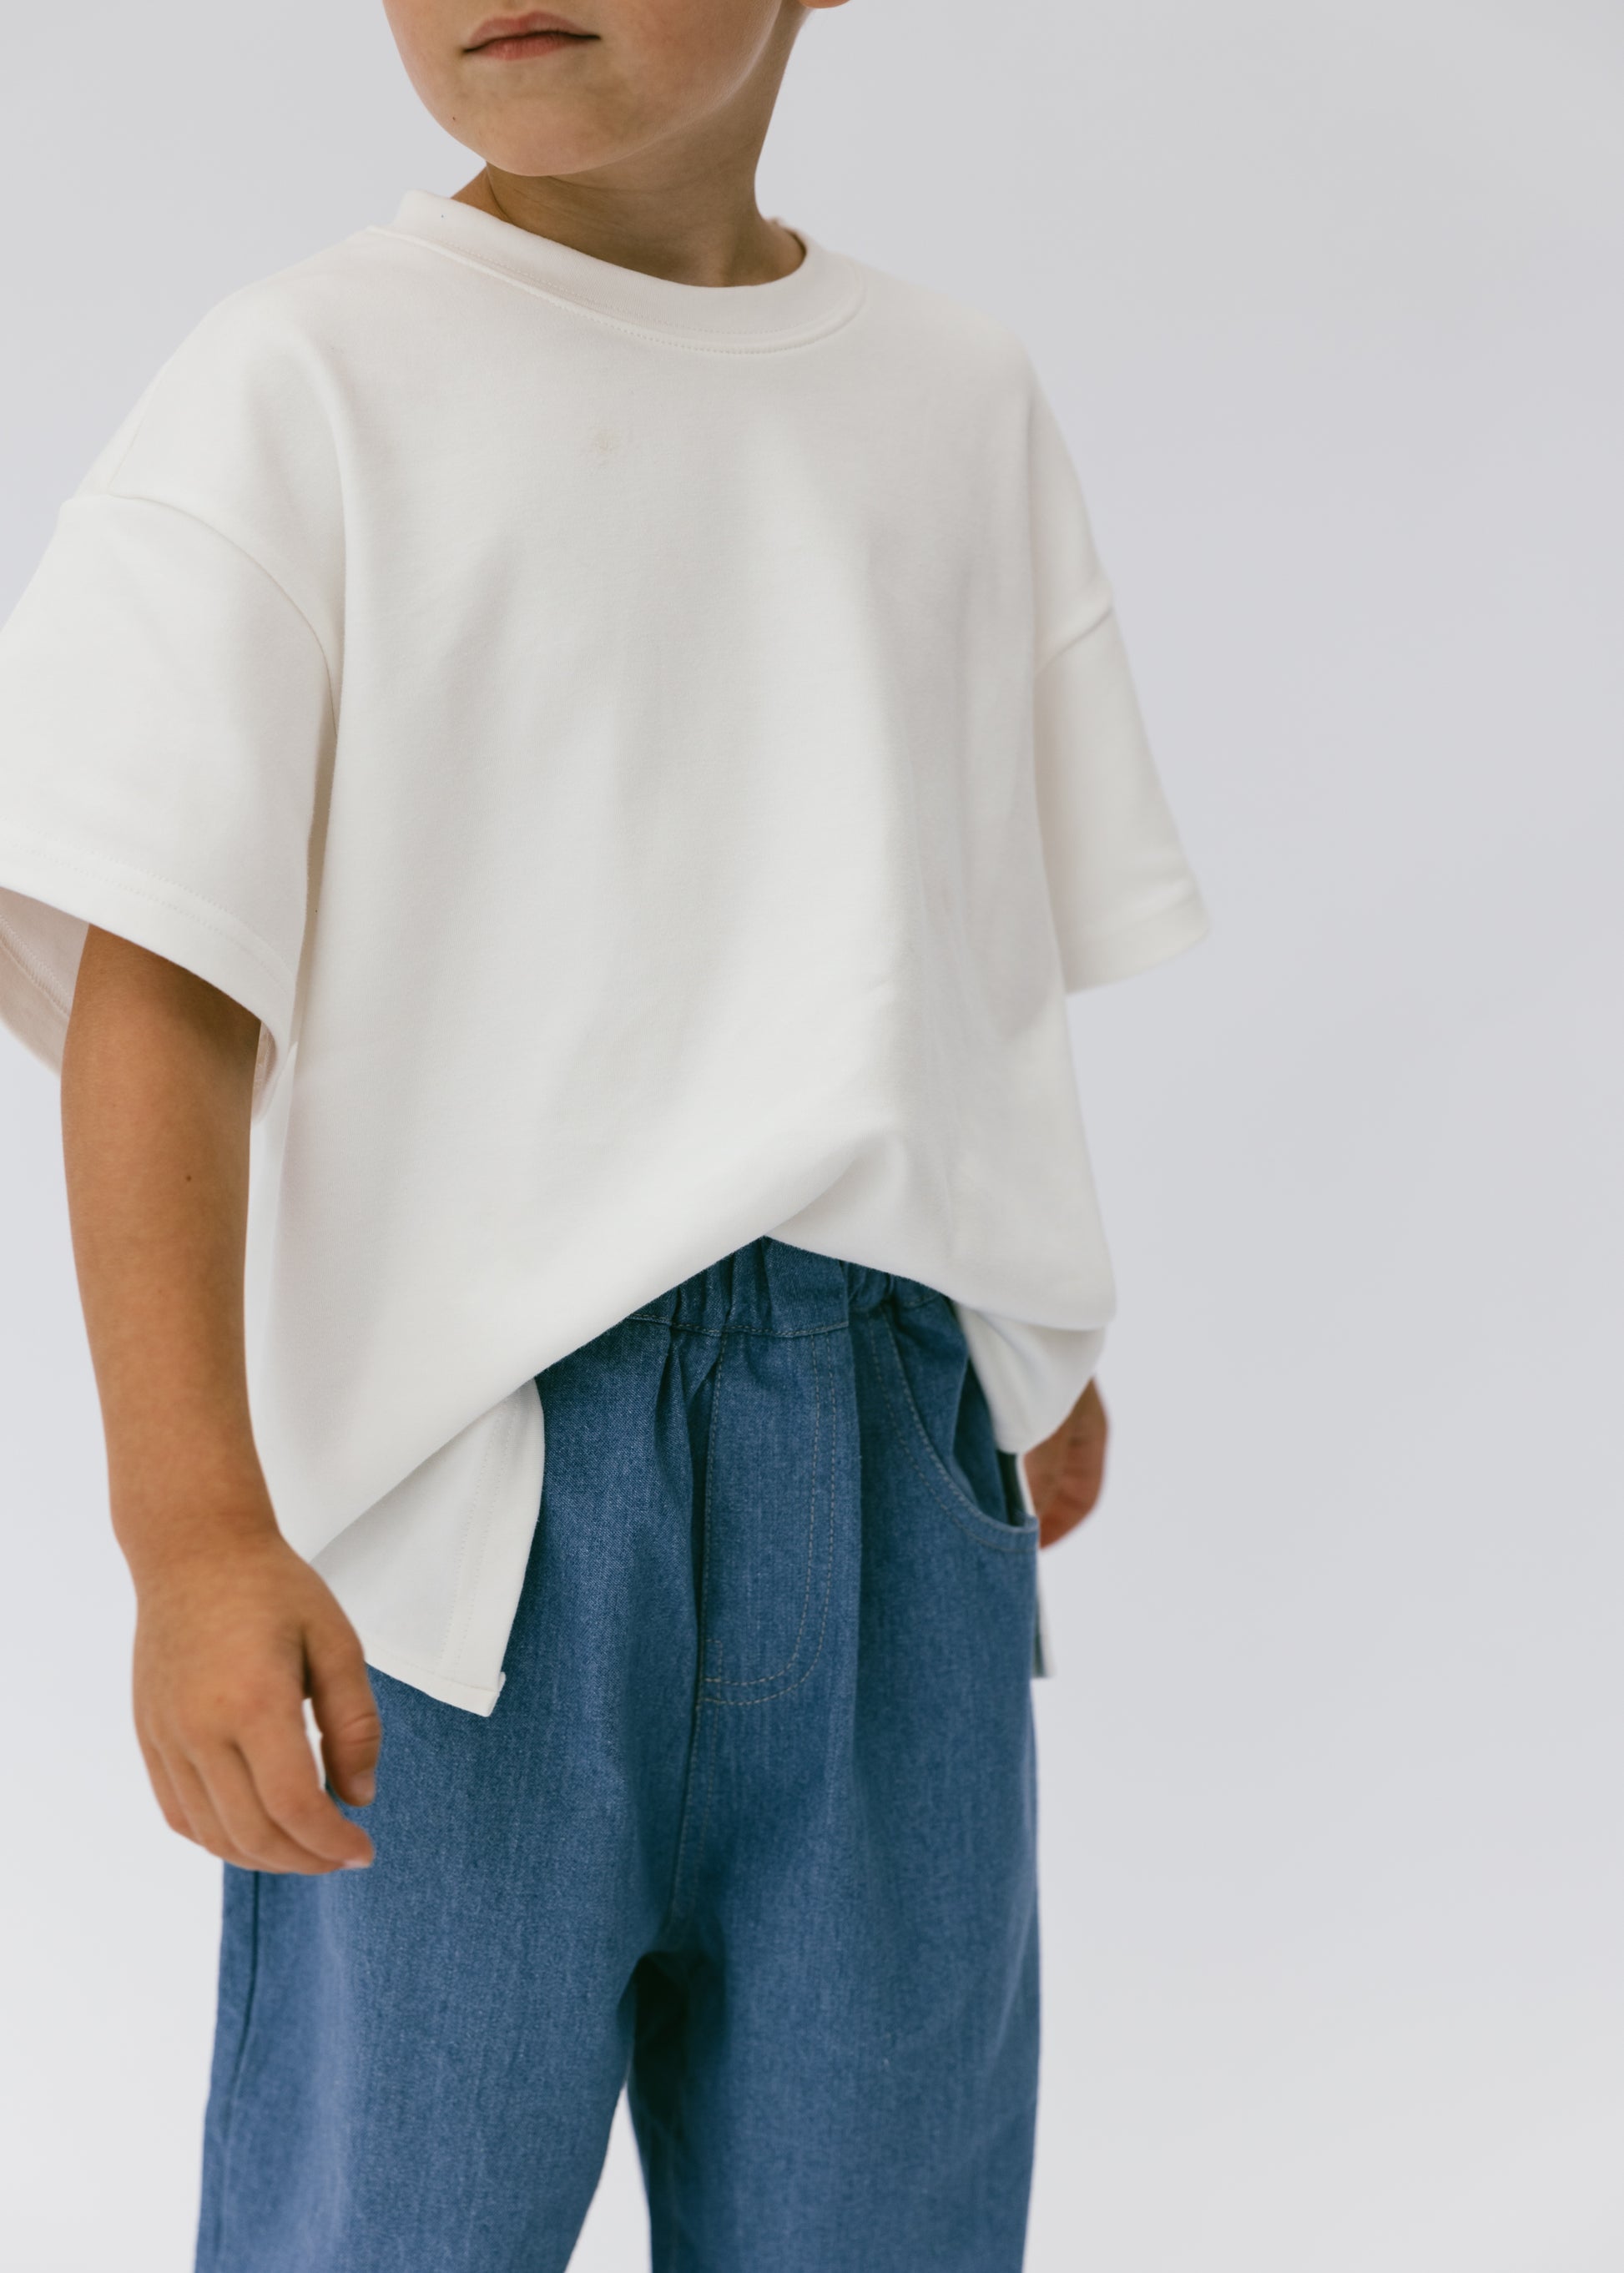  Fostered Collection  ‘90s Baggy Jeans